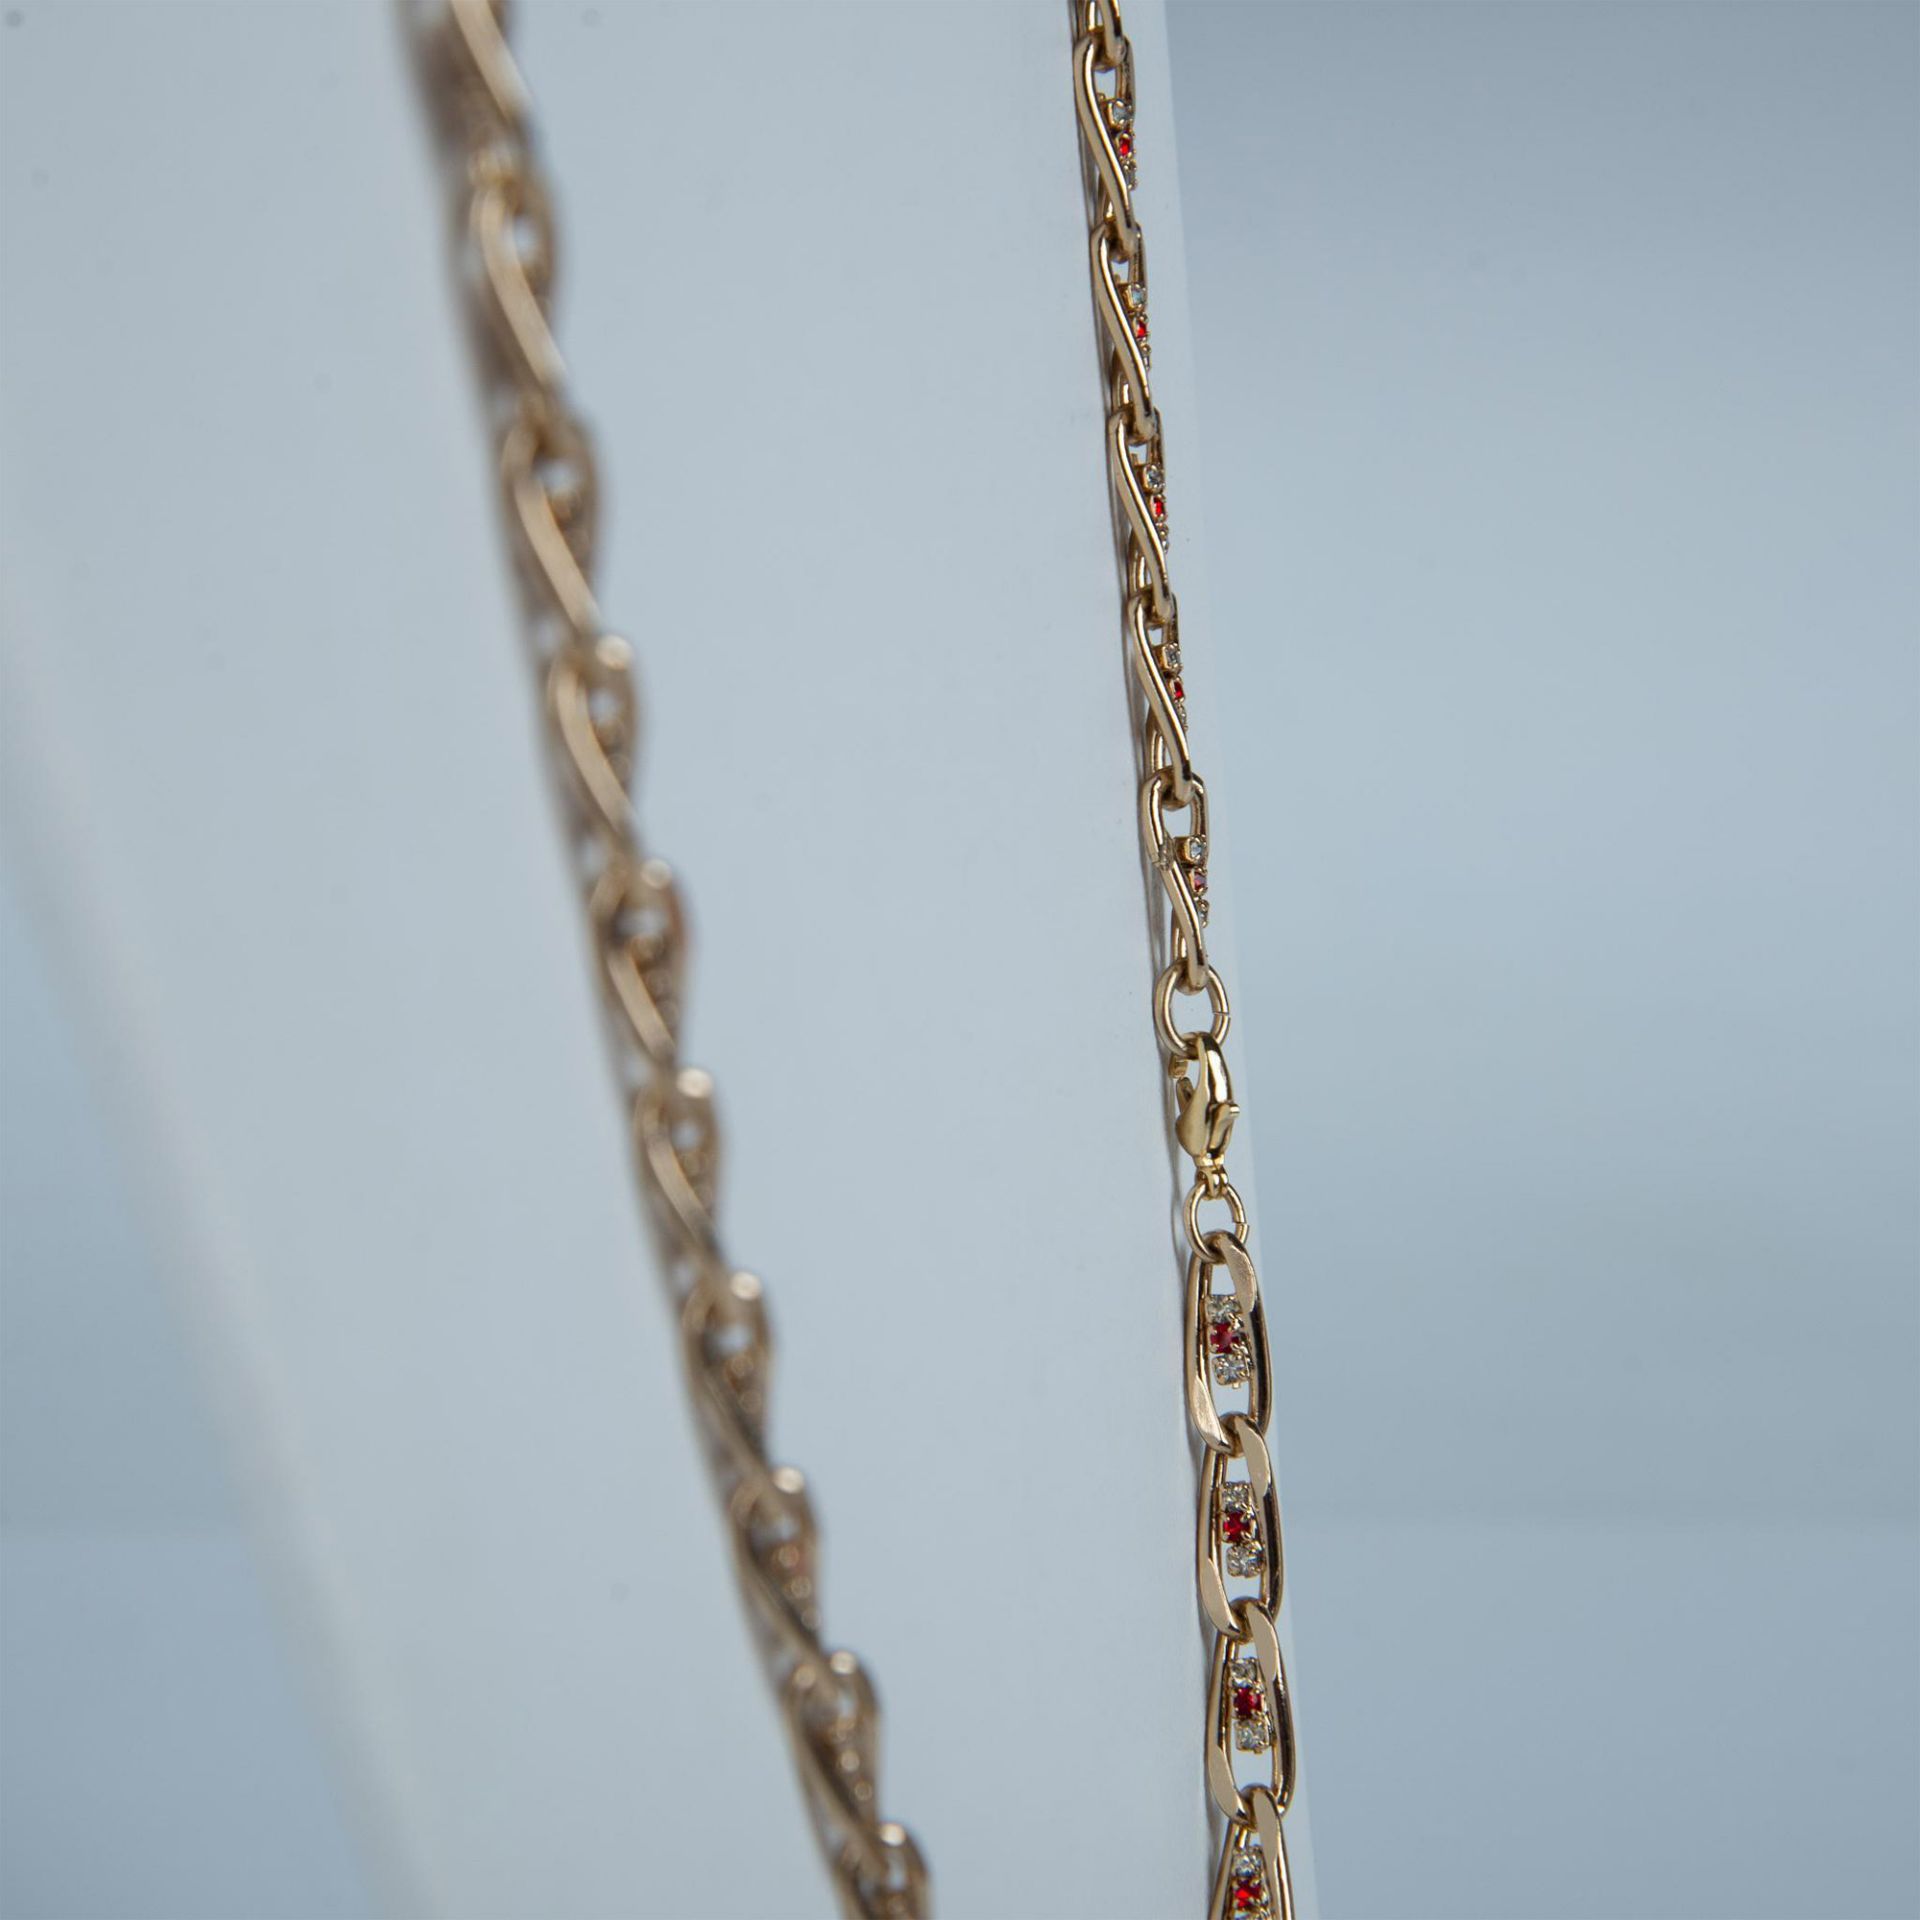 Unique Gold Metal & Crystal Chain Necklace - Image 2 of 3